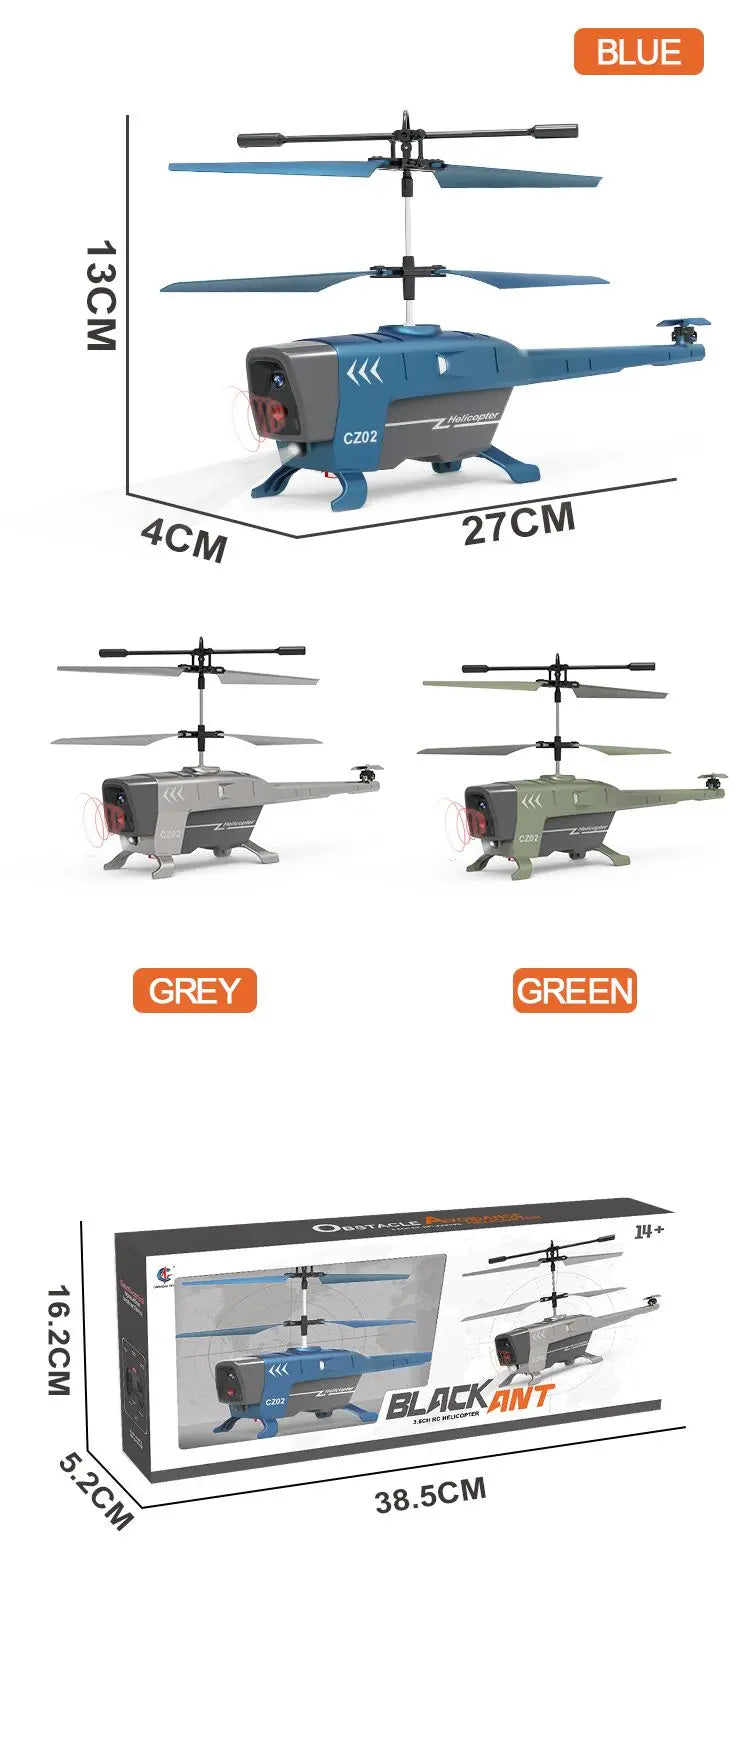 CX068 RC Helicopter x 1 (including built-in battery)